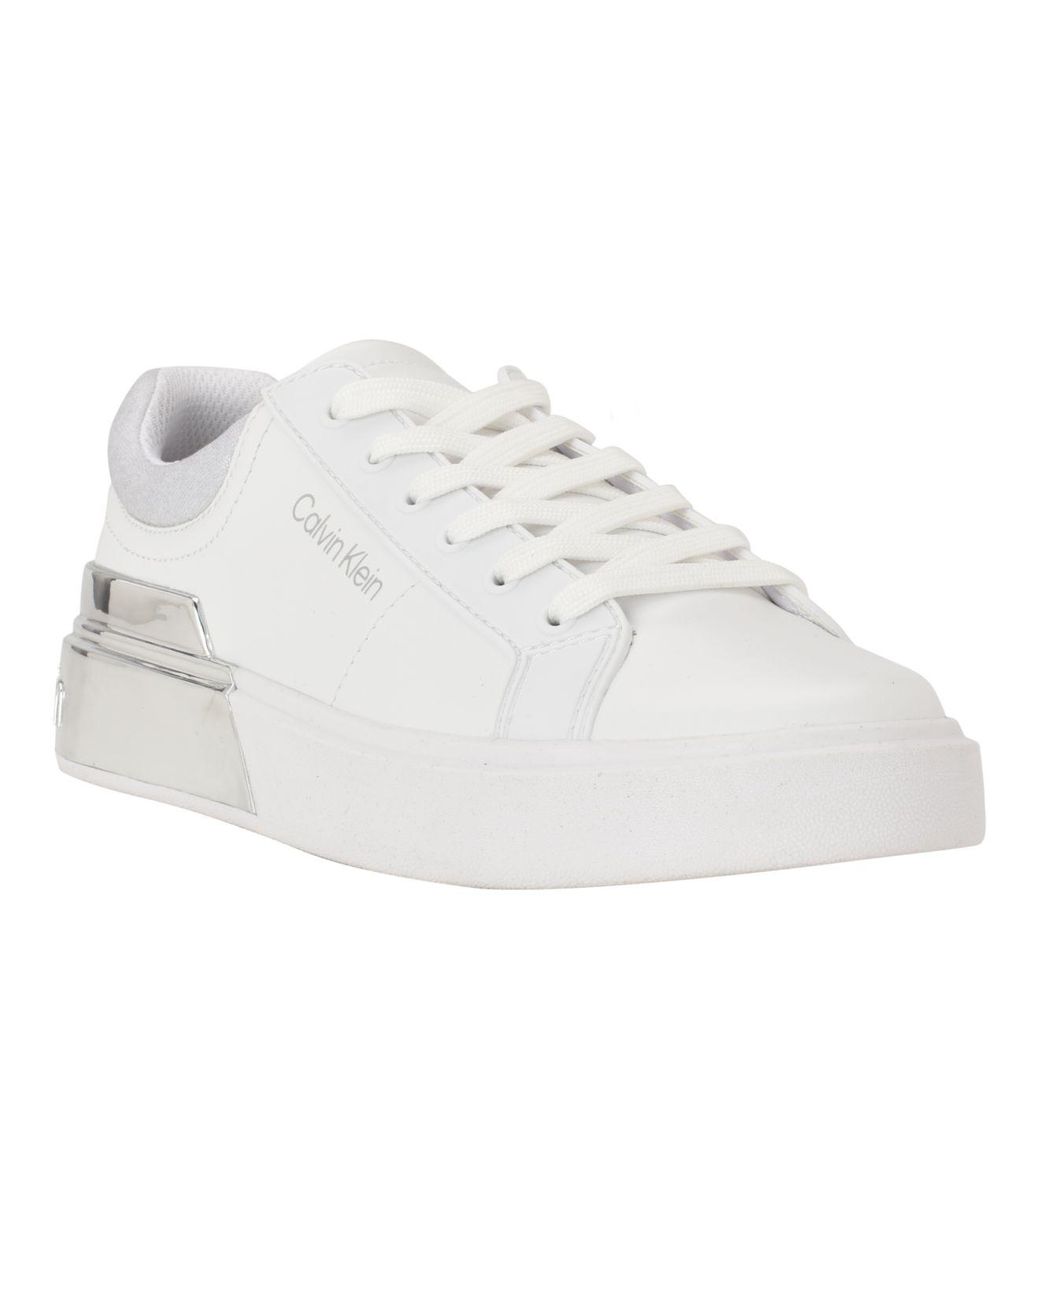 Calvin Klein Berna Lace-up Sneakers in White | Lyst